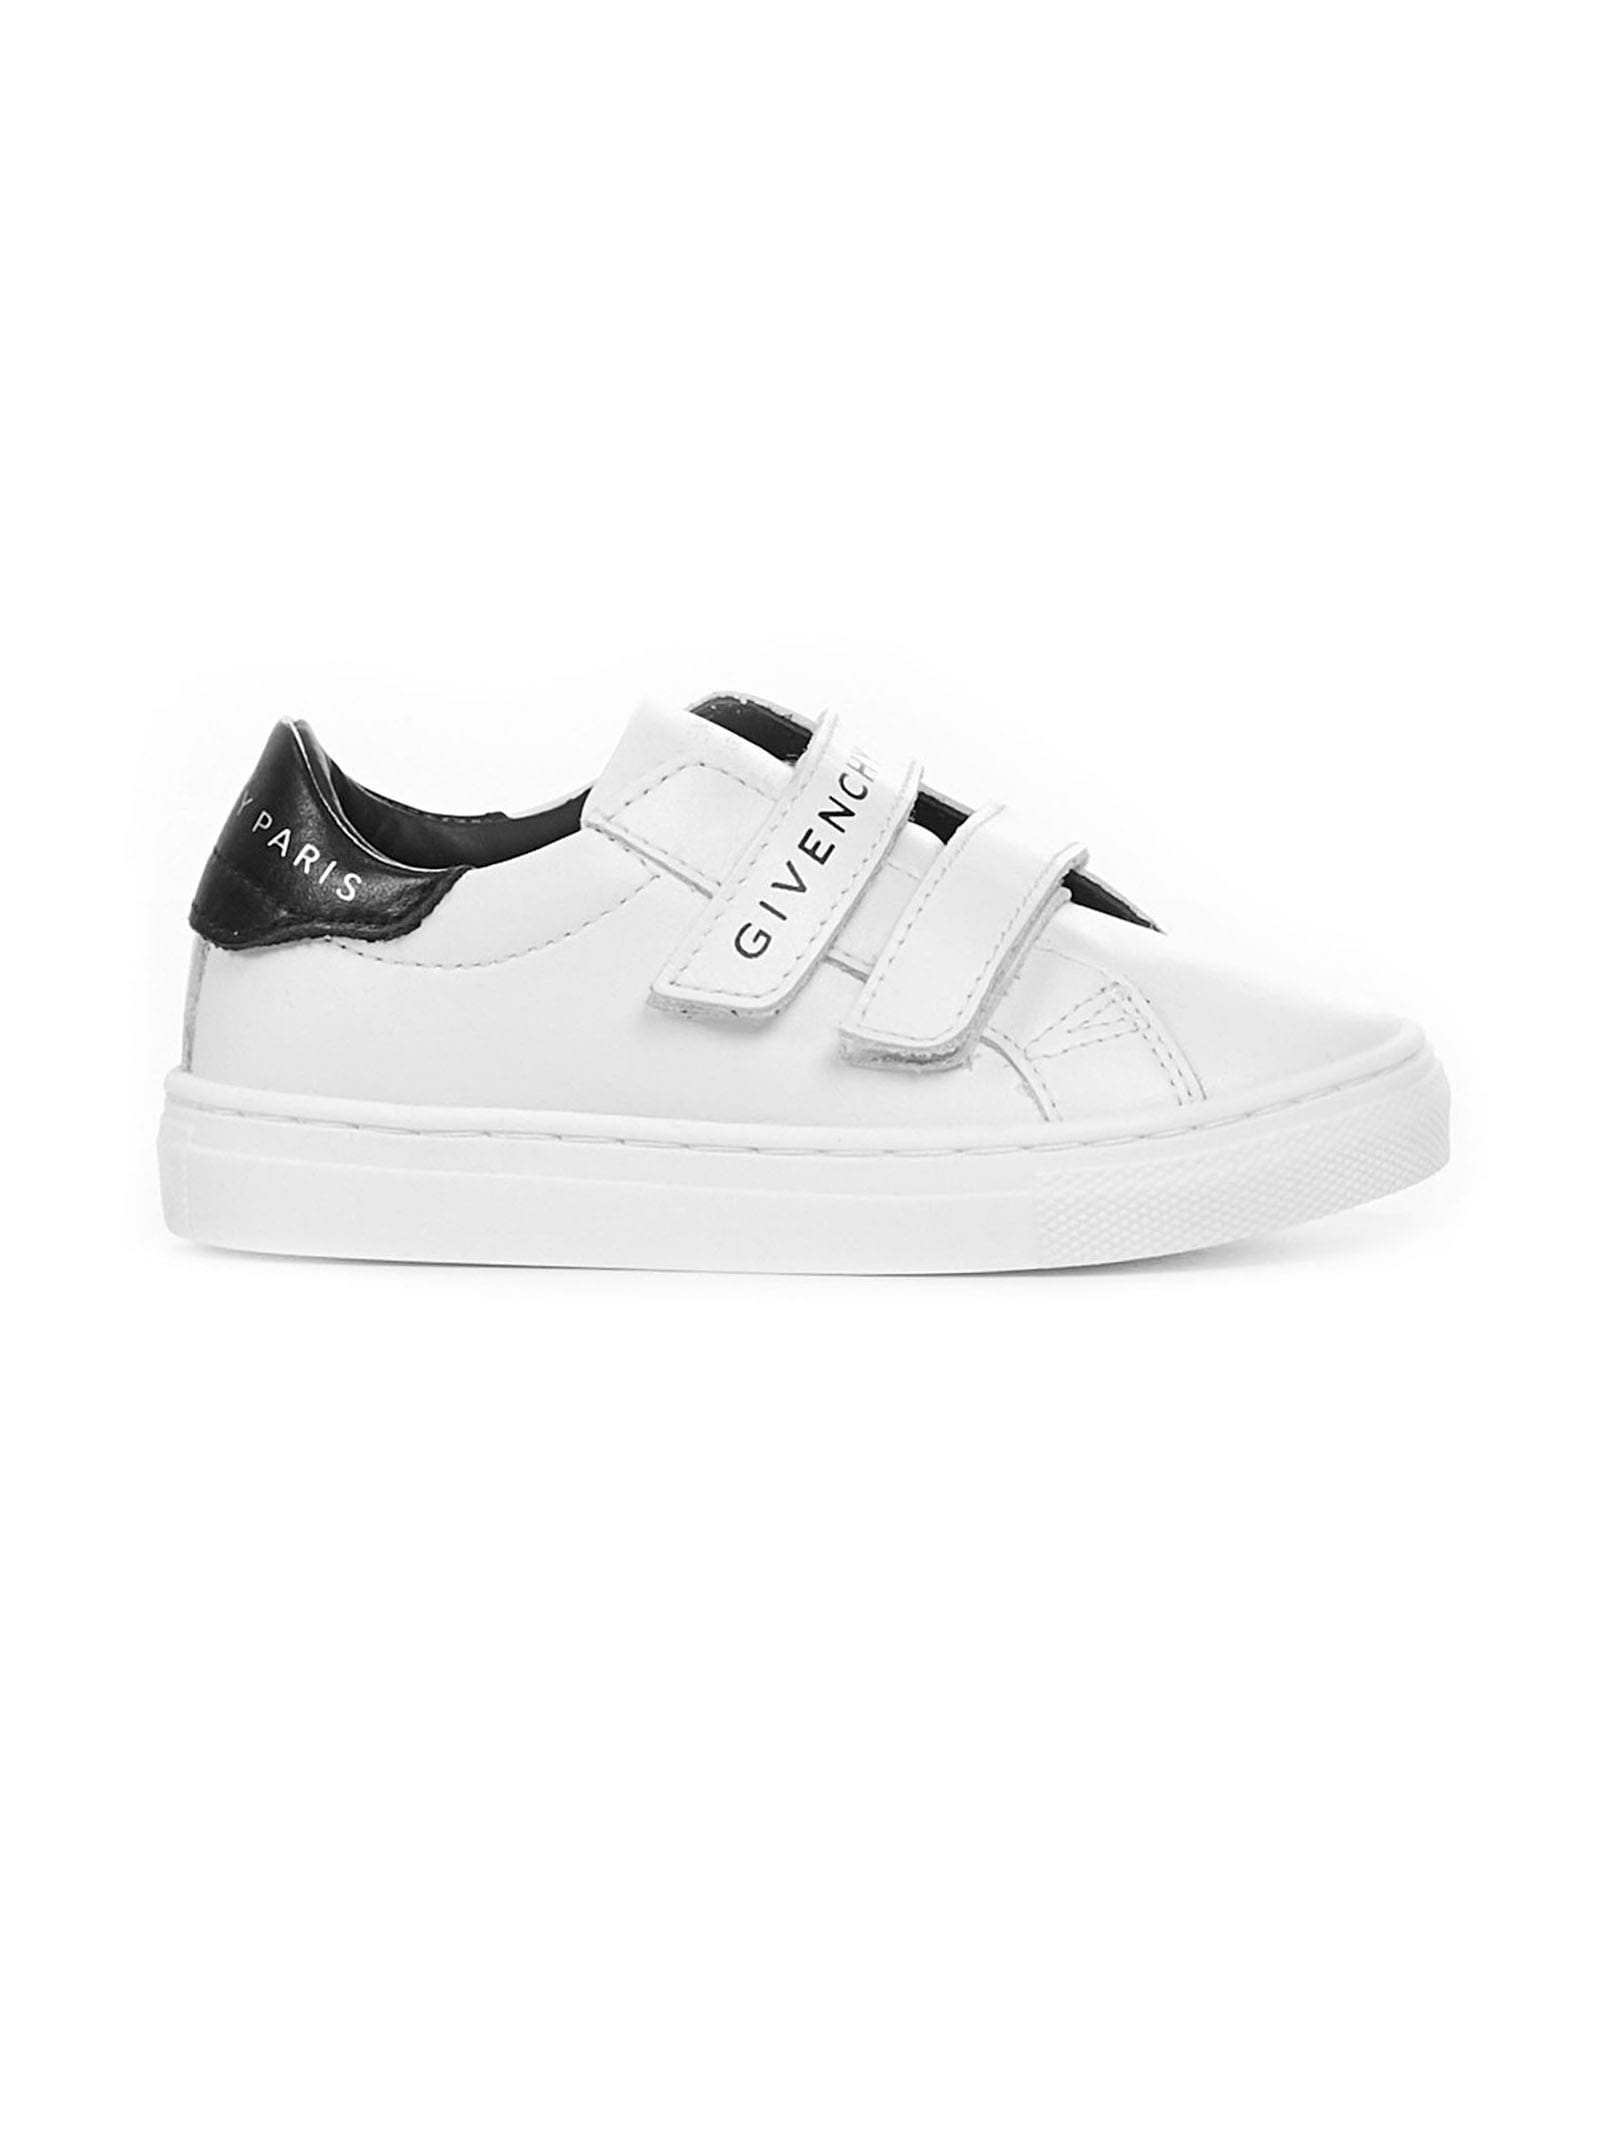 GIVENCHY WHITE LEATHER SNEAKERS,H09021 10B